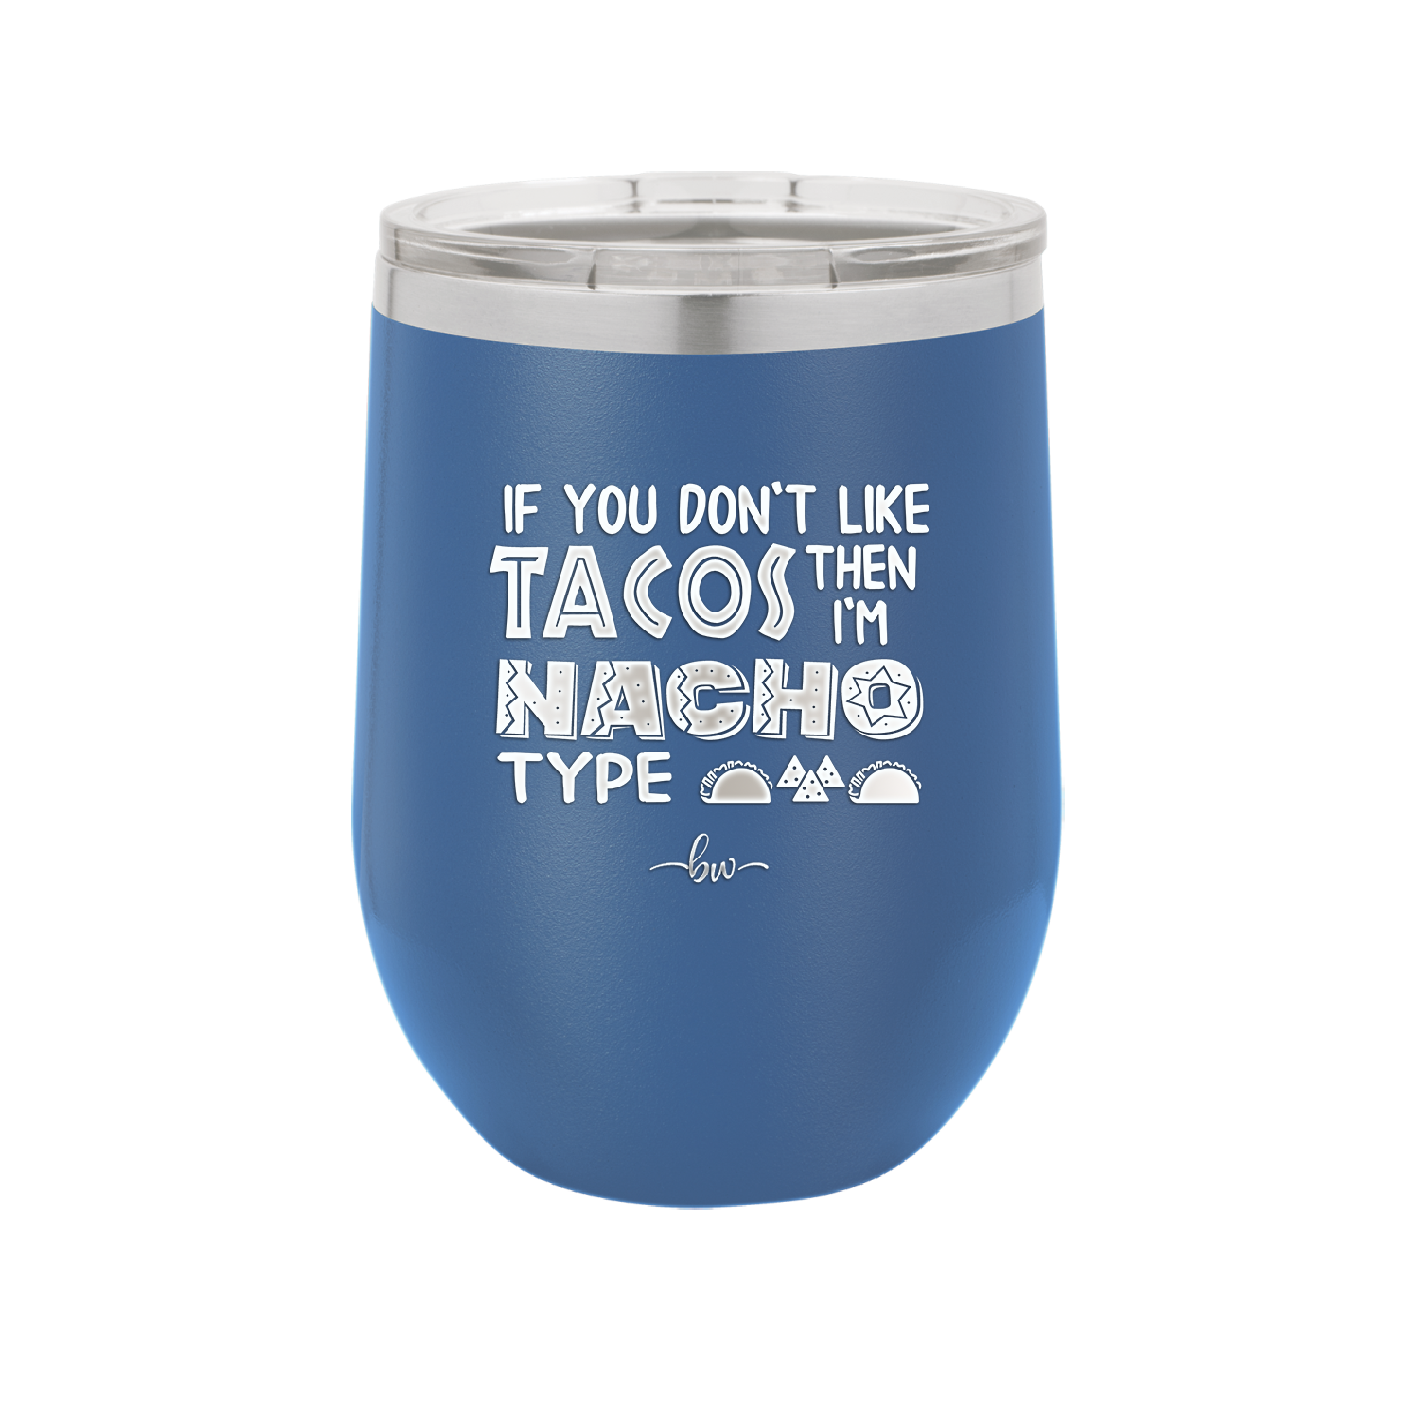 If You Don't Like Tacos Then I'm Nacho Type - Laser Engraved Stainless Steel Drinkware - 2129 -